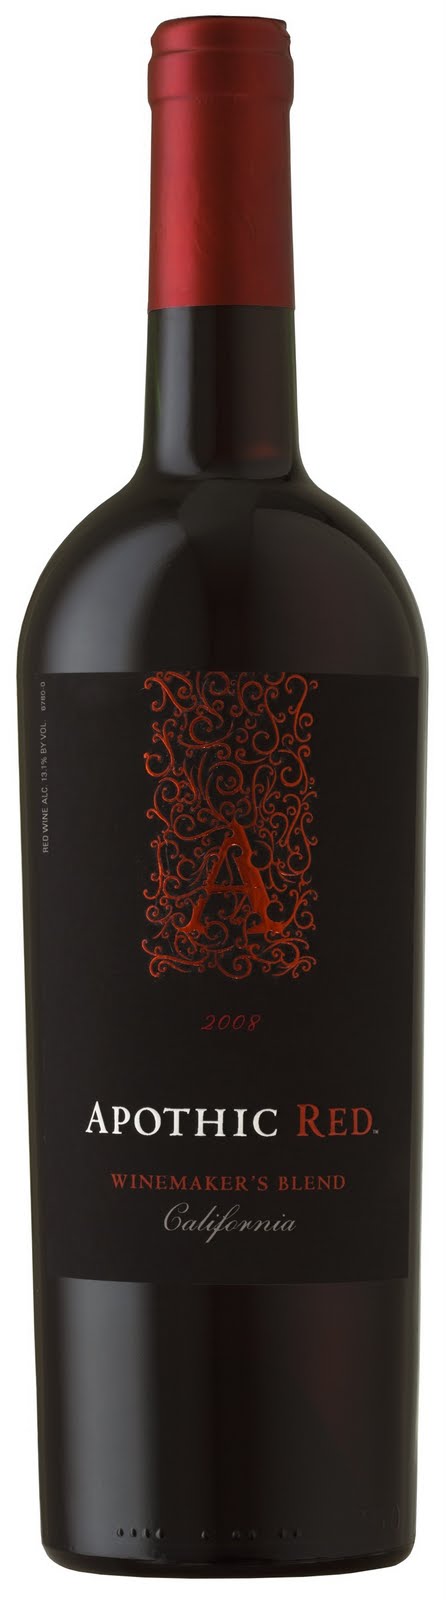 2016 Apothic Red Inferno Red Blend California image